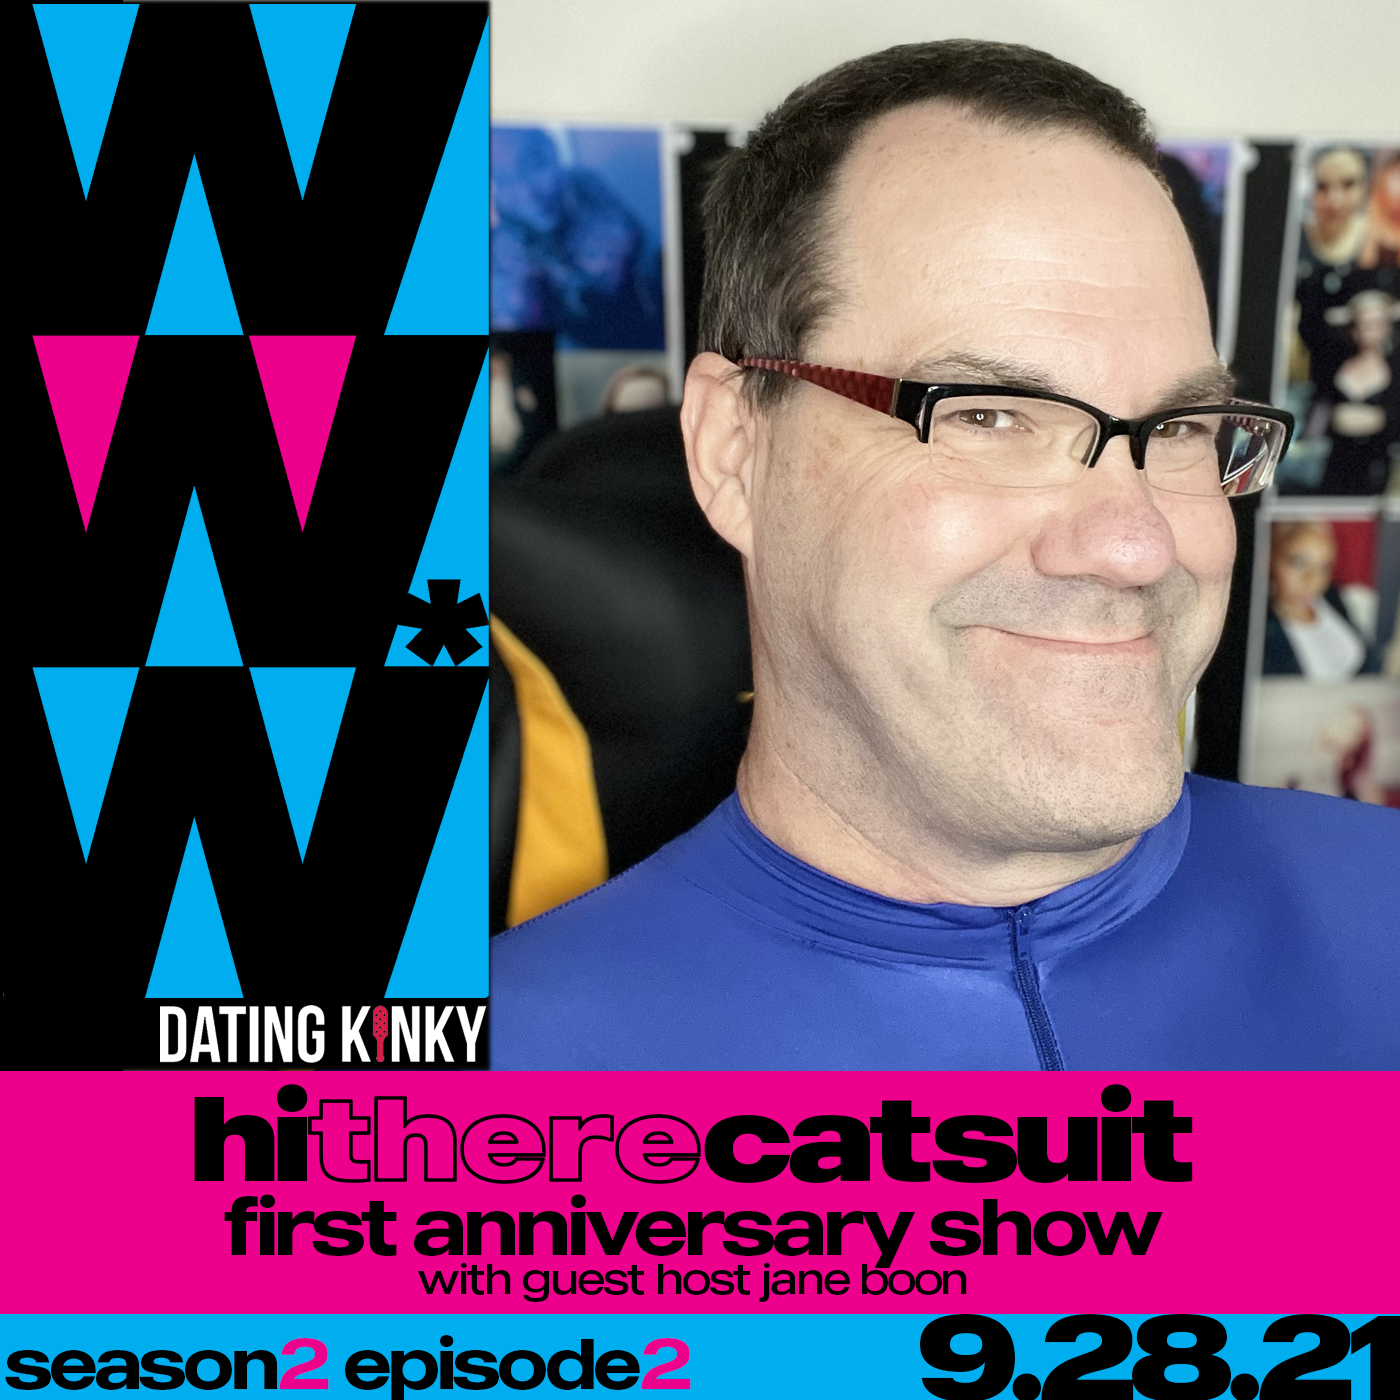 The First Anniversary Show with HiThereCatsuit, hosted by Jane Boon